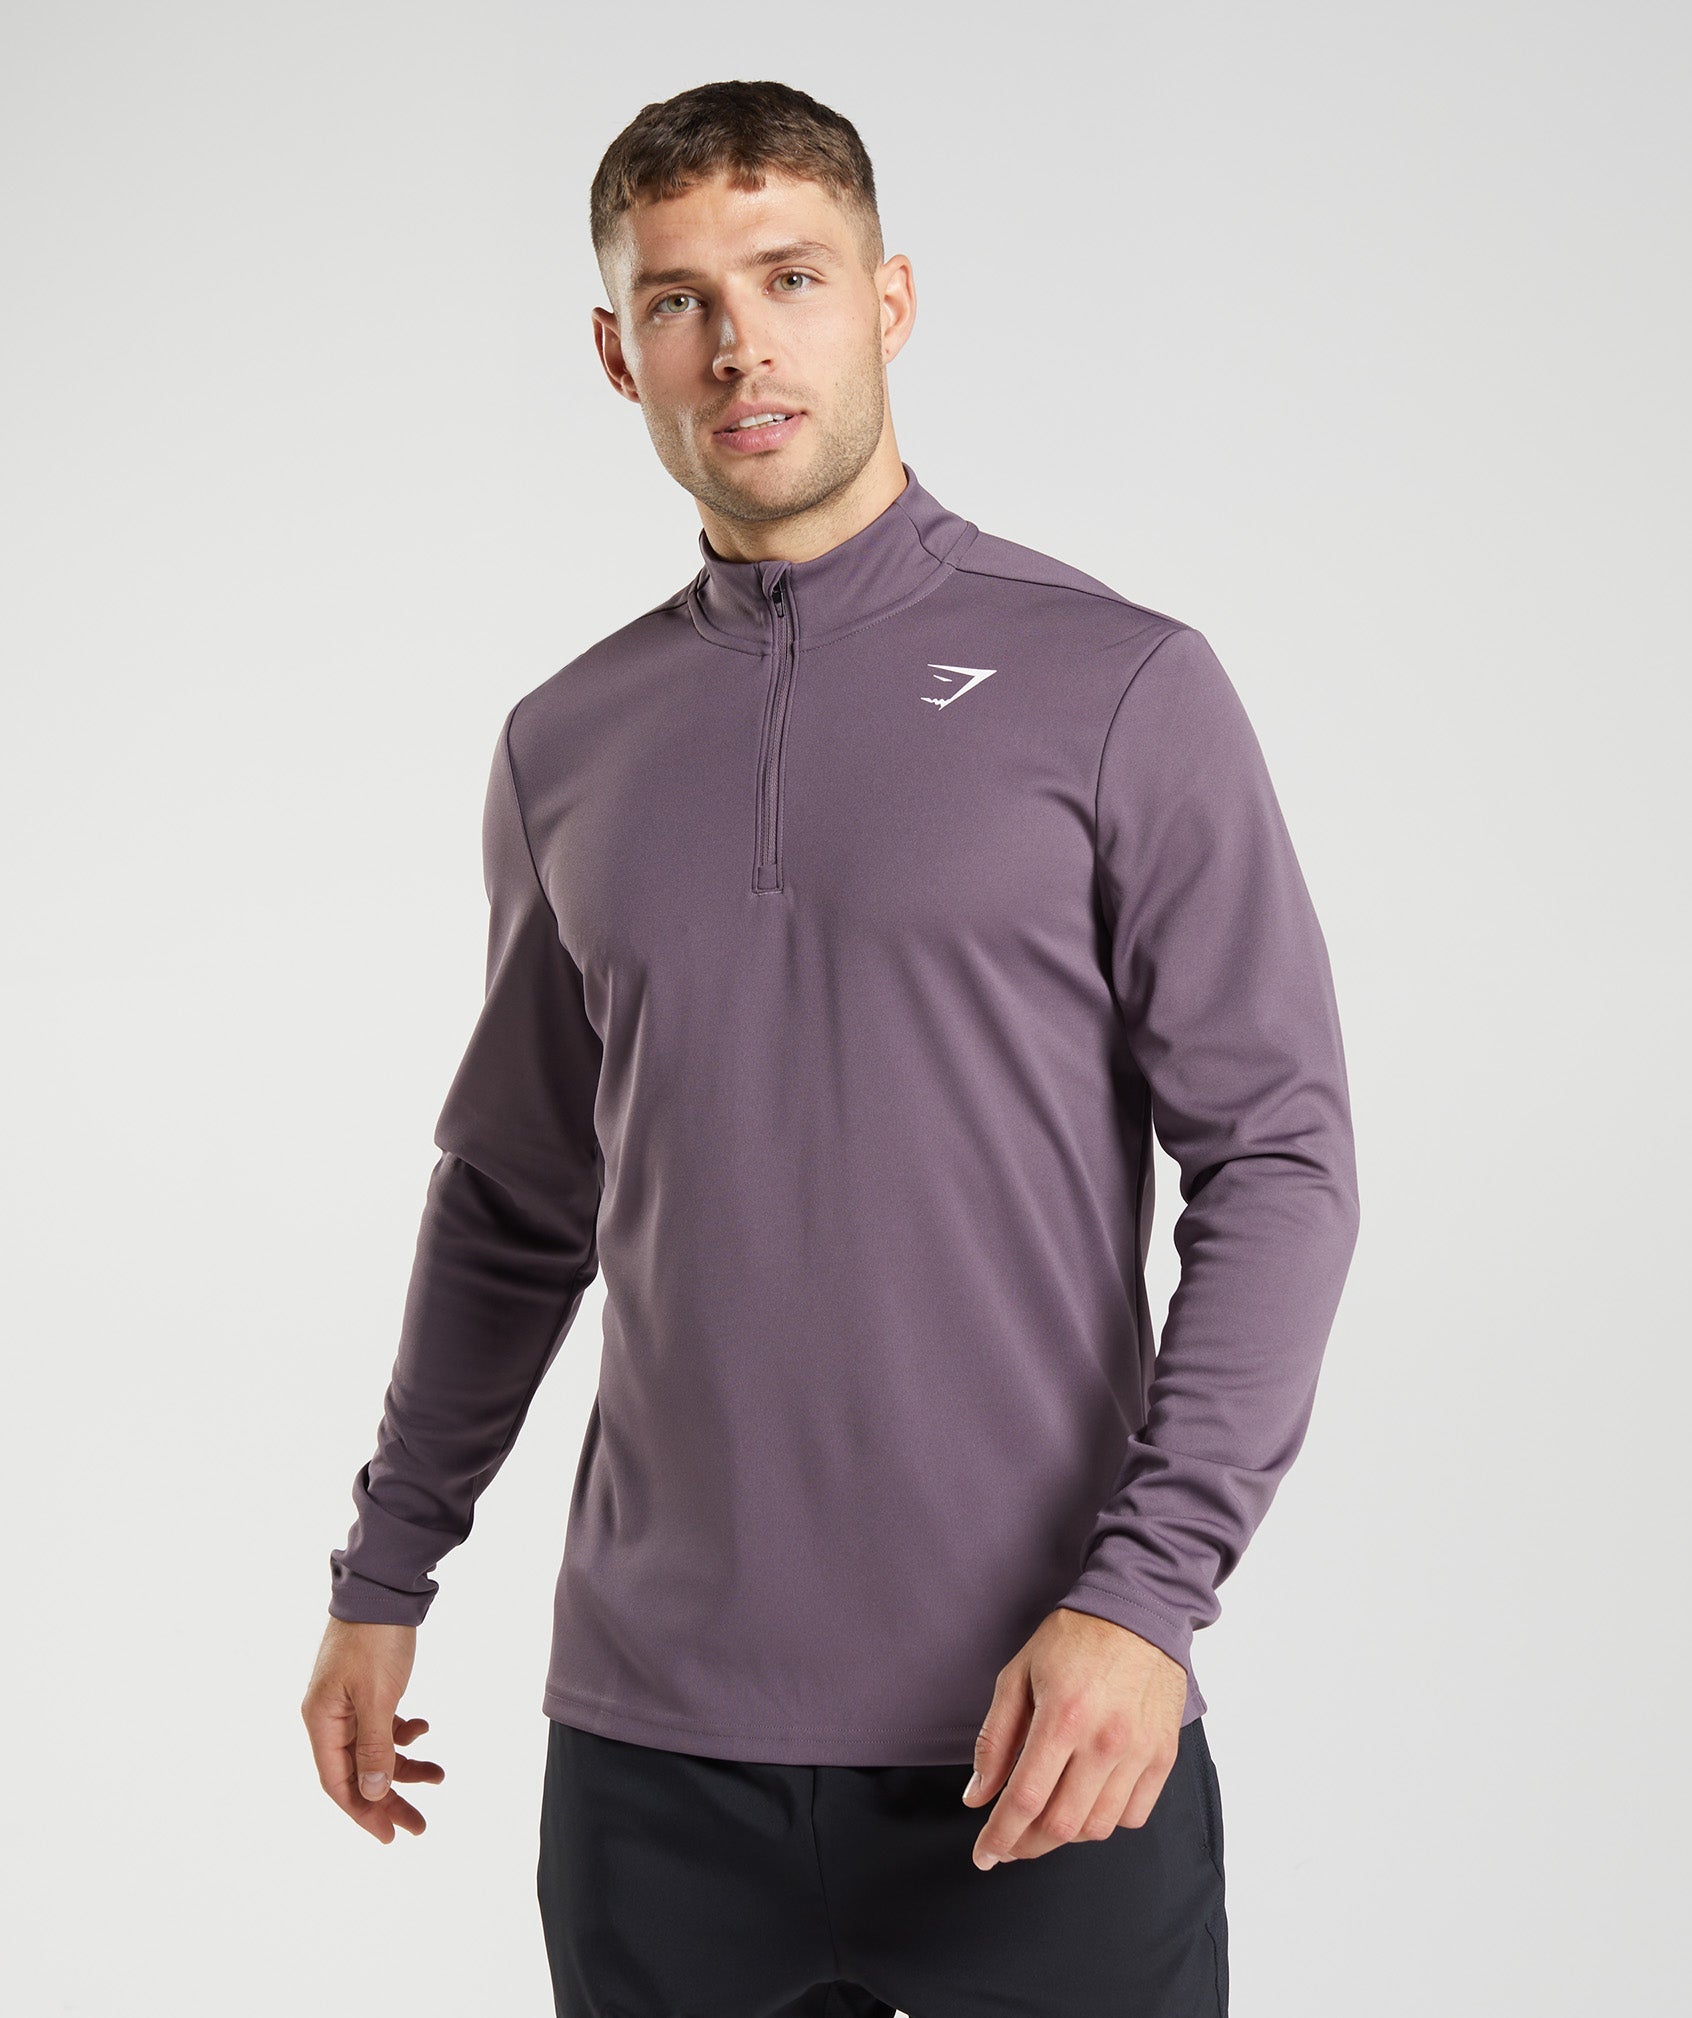 Arrival 1/4 Zip Pullover in Musk Lilac - view 1